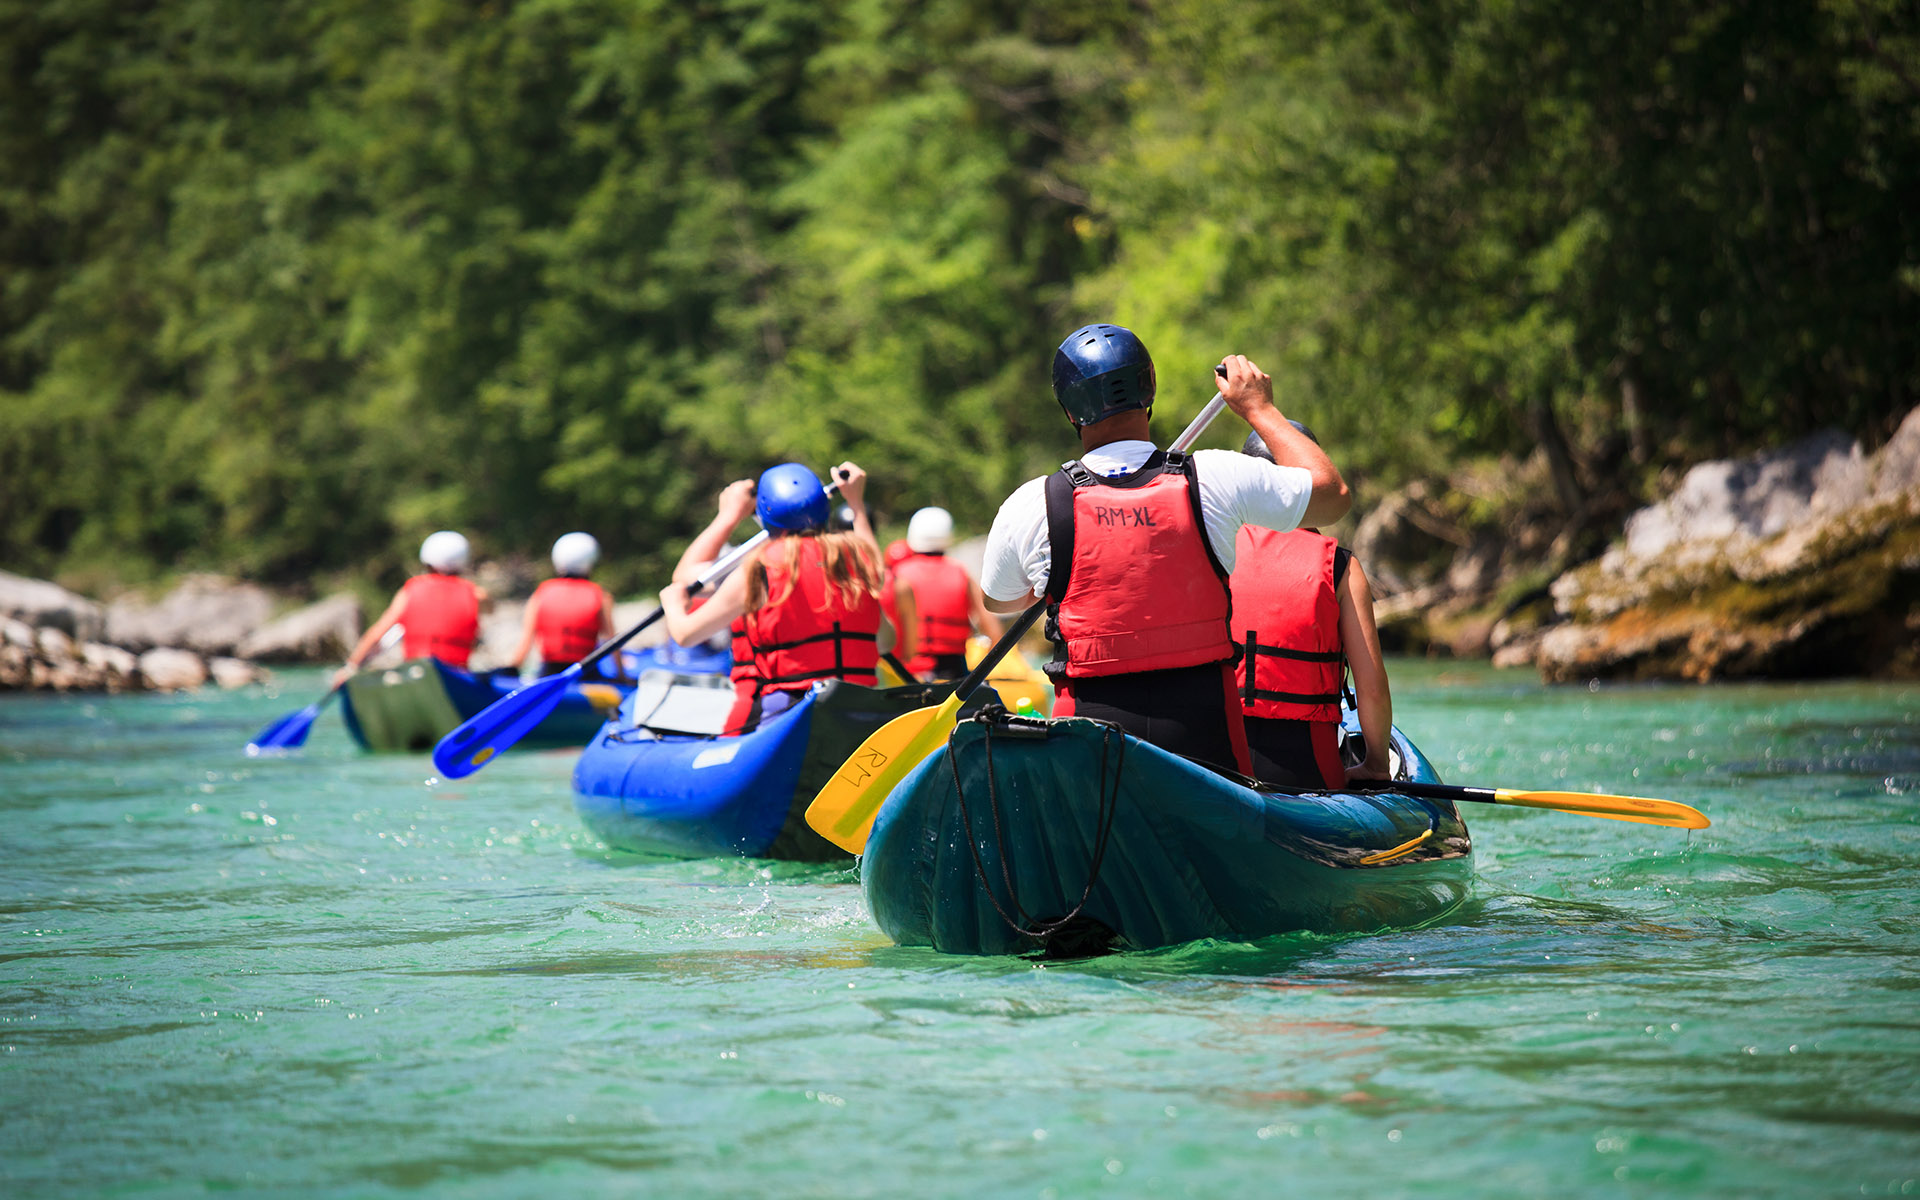 River Outfitter Insurance Guide - Group of People River Rafting on a Calm River in Between a Forest of Pine Trees